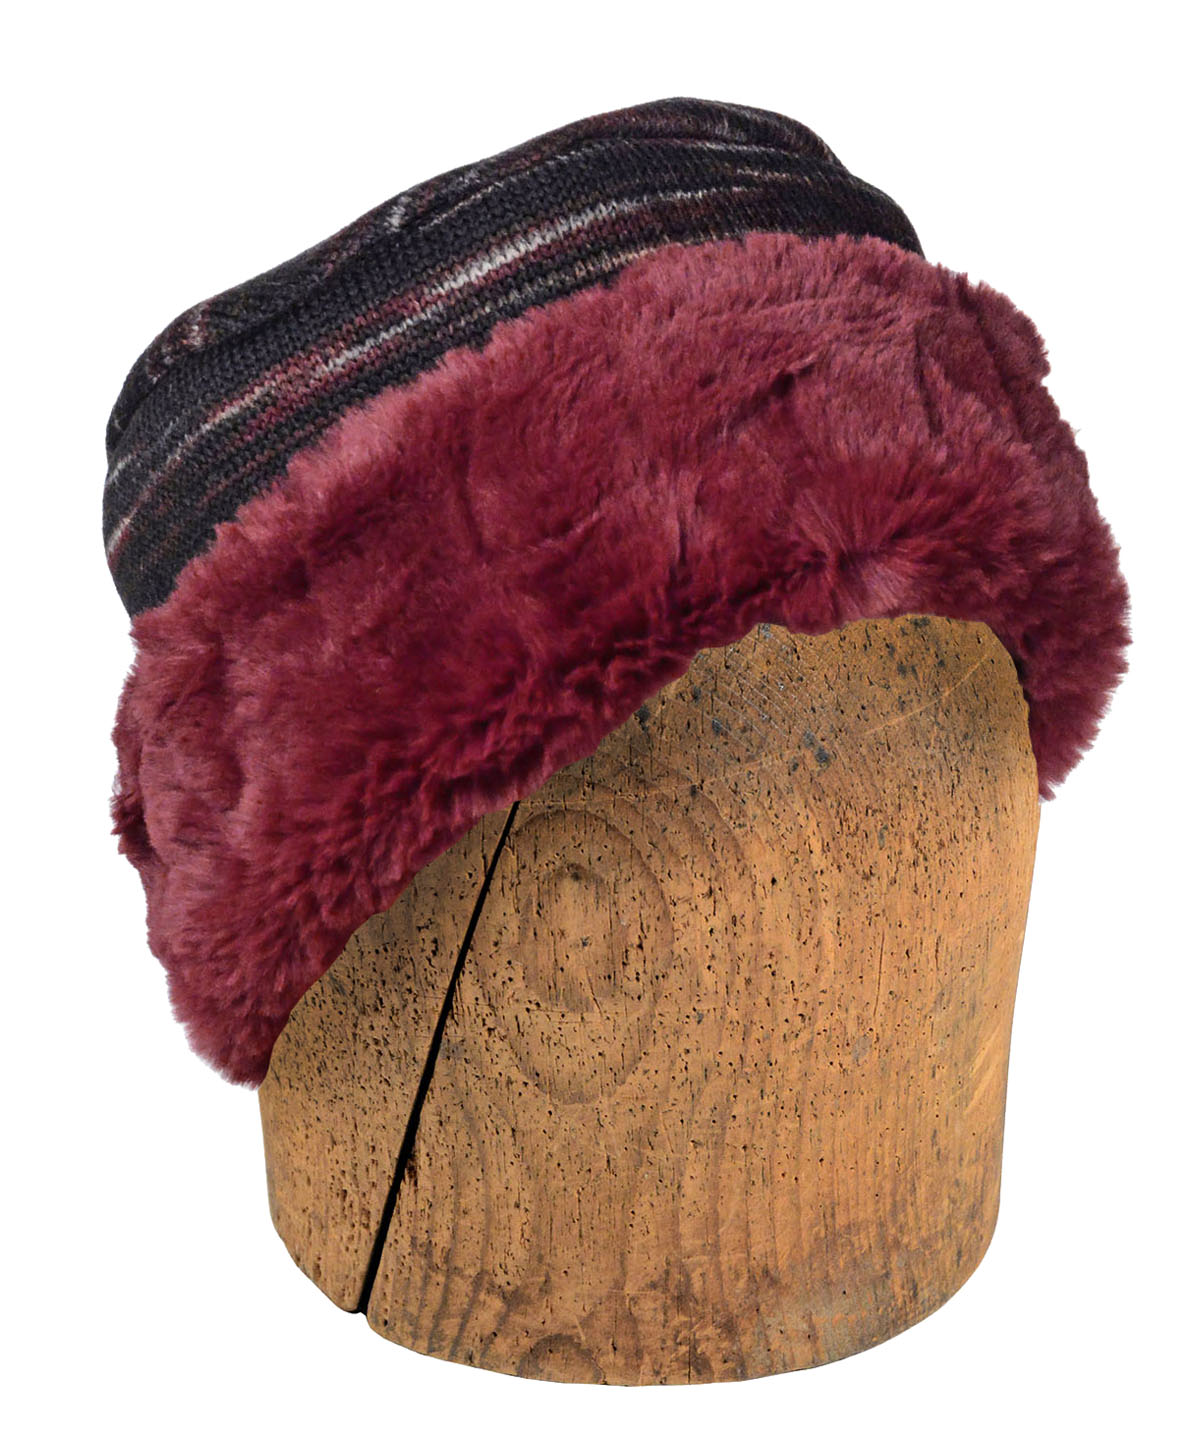 Men&#39;s 2-tone Cuffed Pillbox | Sweet Stripes in Cherry Cordial Knit Fabric with Cranberry Creek Faux Fur | By Pandemonium Millinery| Handmade in Seattle WA